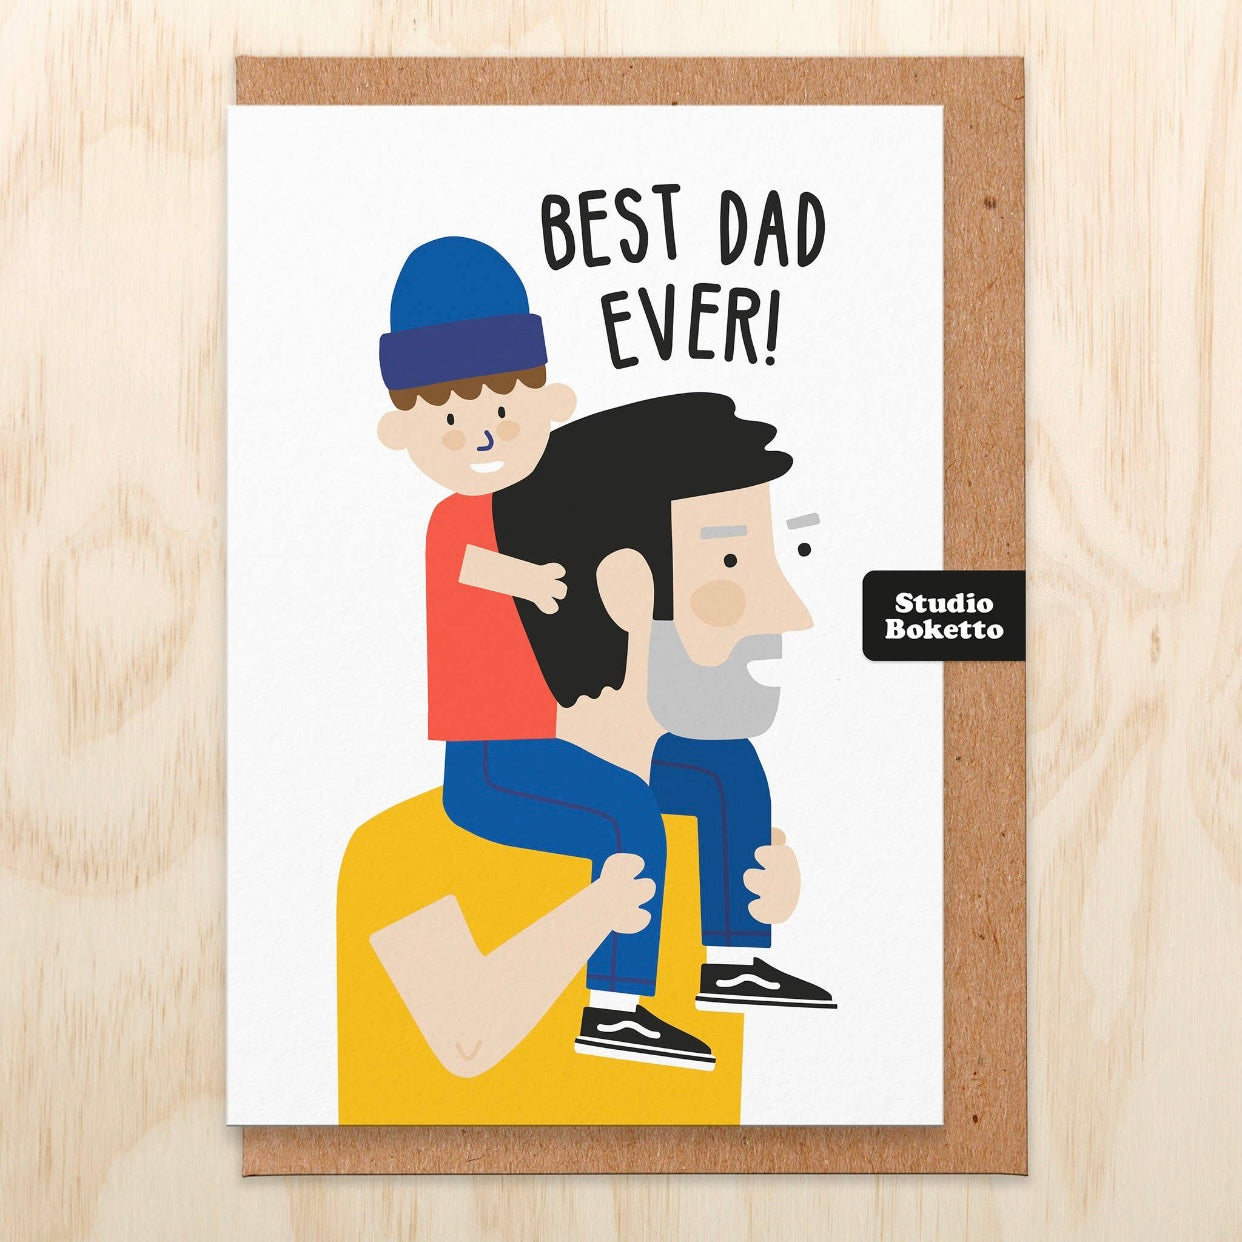 Best Dad Ever greeting card